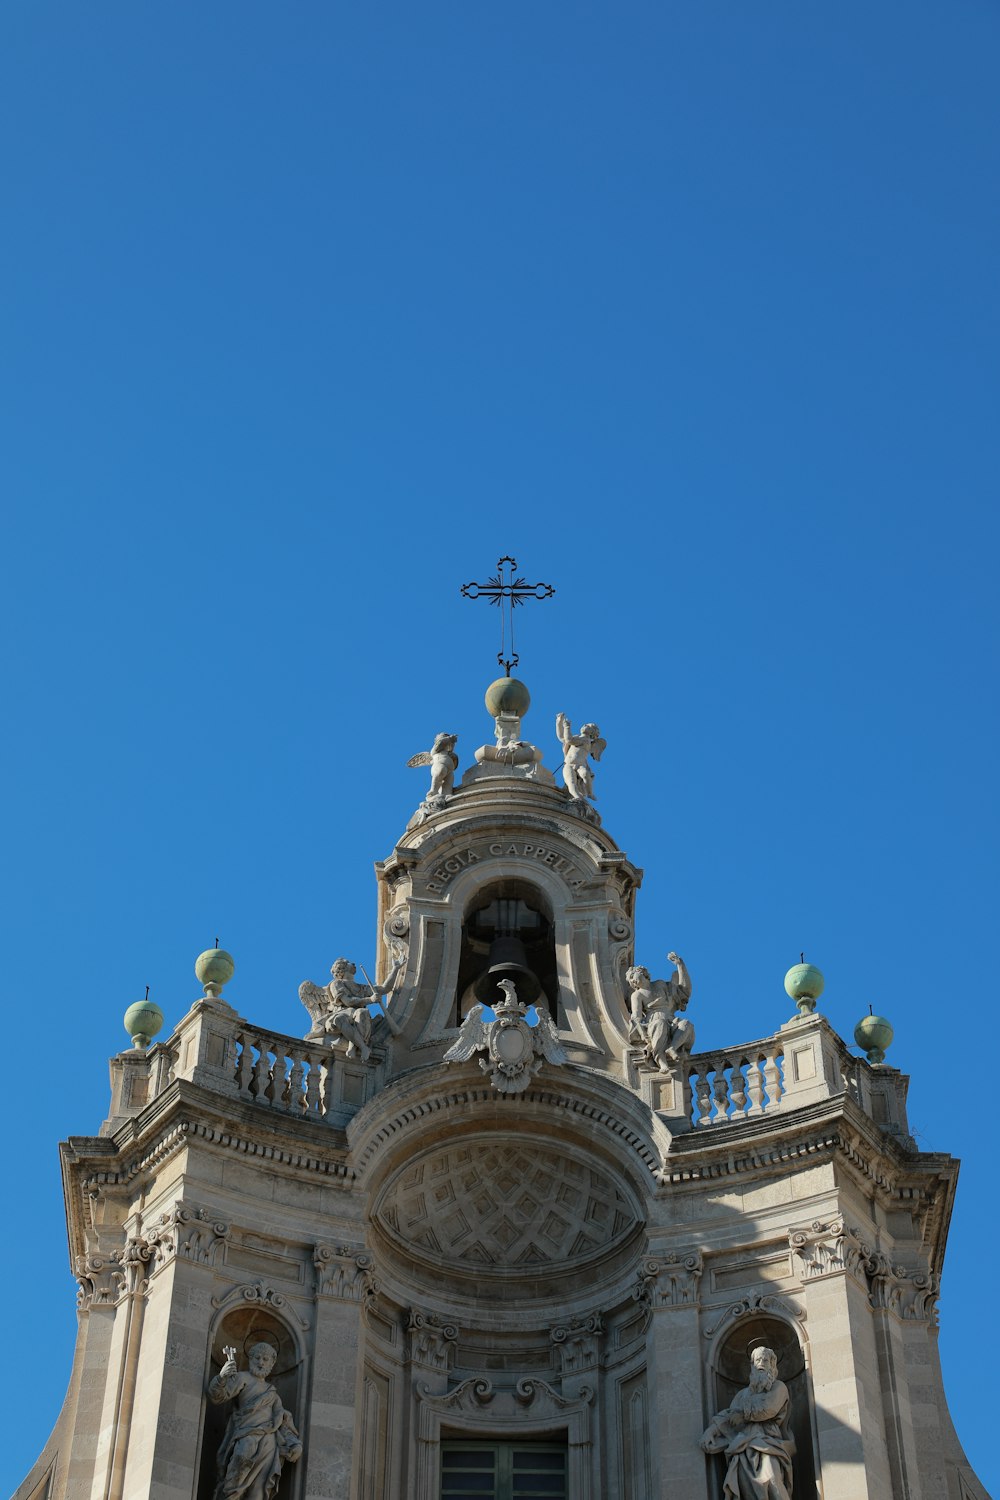 the top of a building with statues on it